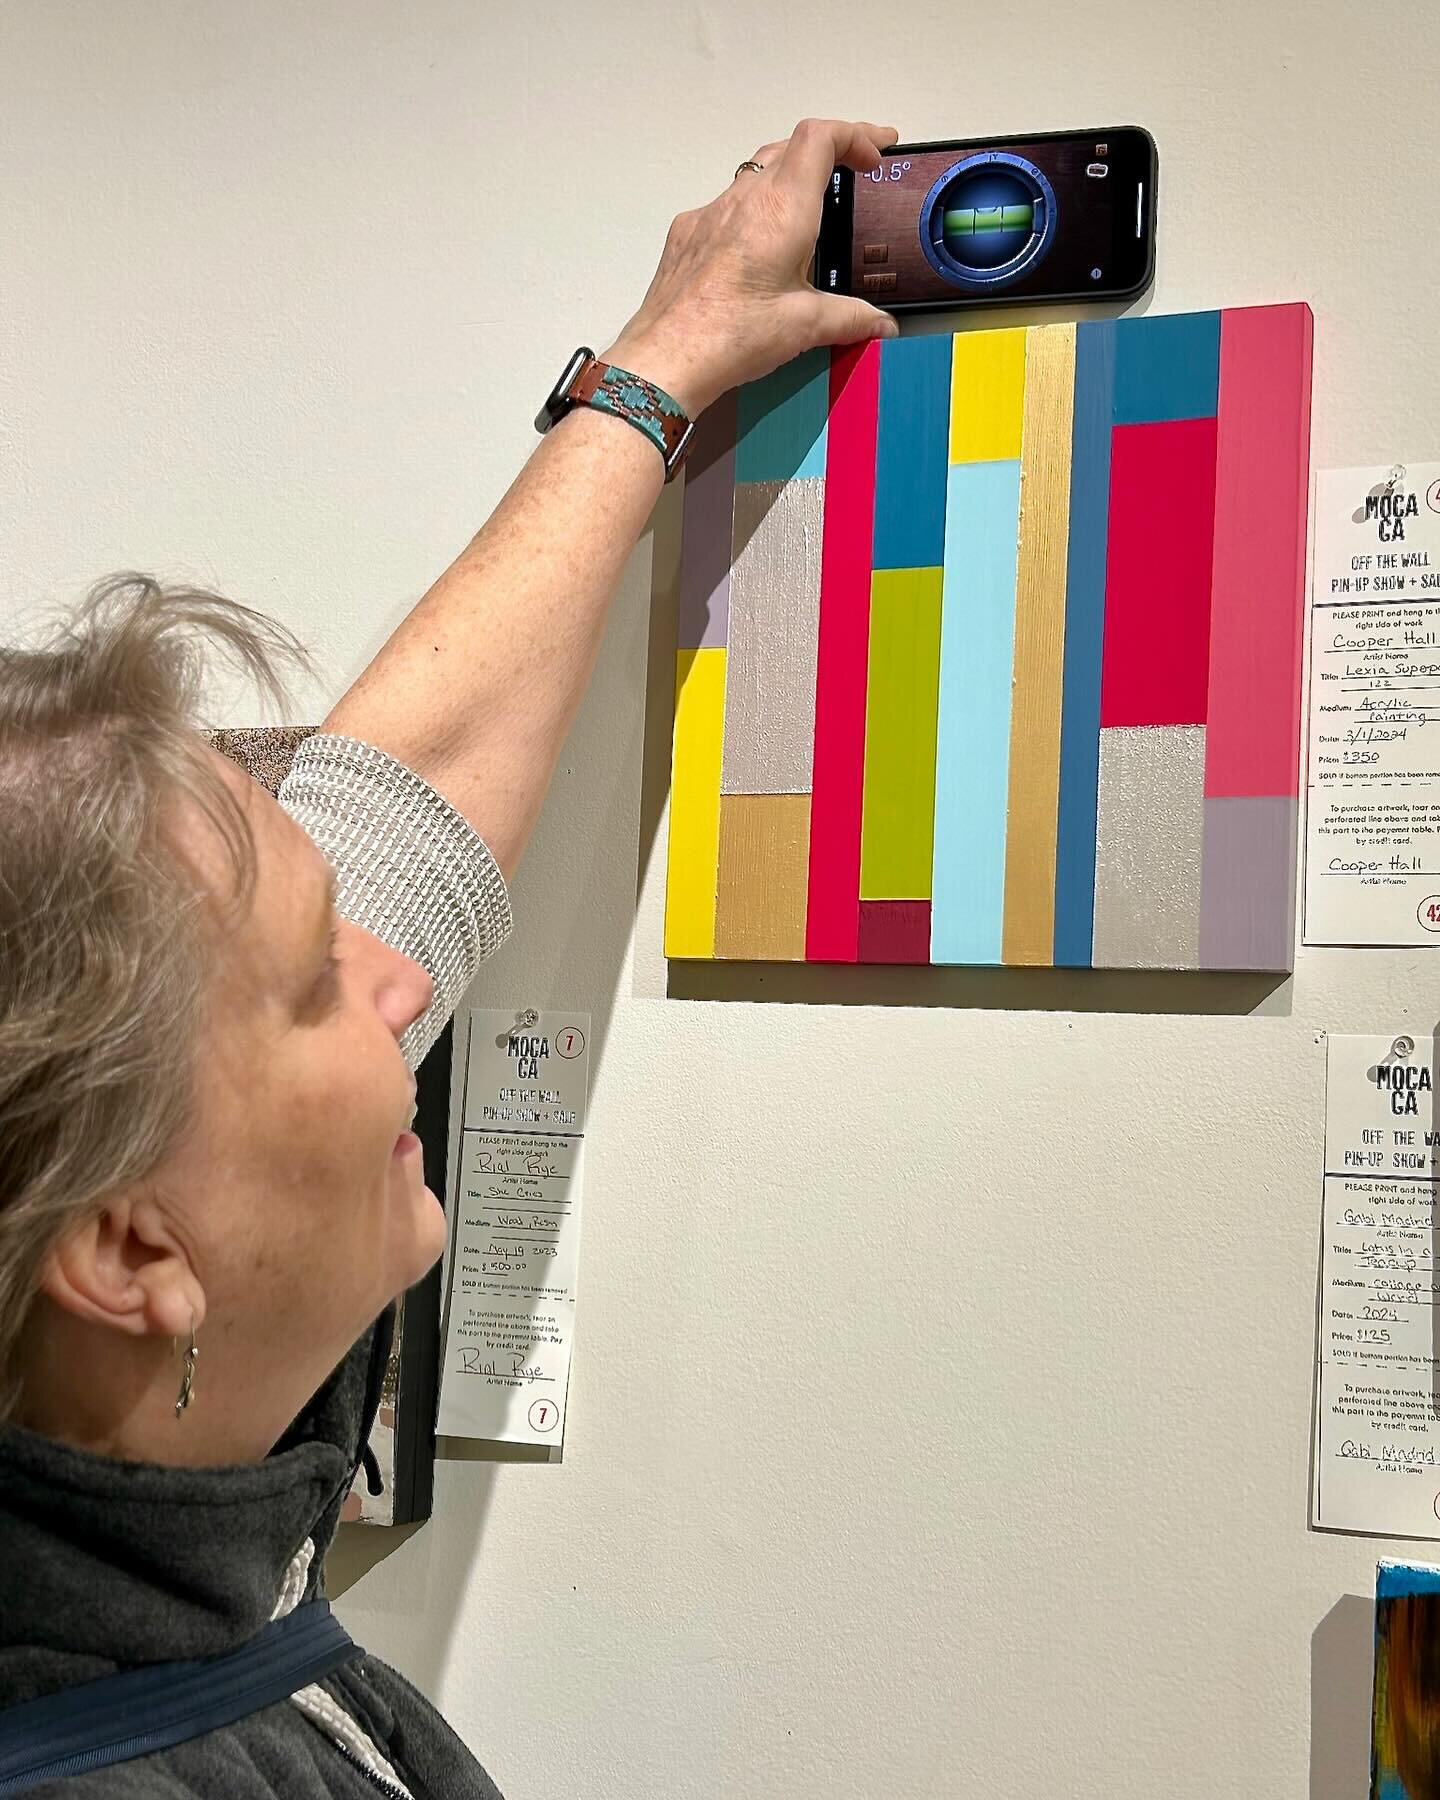 A level app on the iPhone is a great way to hang your art!  Sue recently used the level app when she delivered a piece for client Cooper Hall, an Atlanta artist, to MOCA GA for this week&rsquo;s Off The Wall Pin-Up Show + Sale. @cooperhallart @mocaga